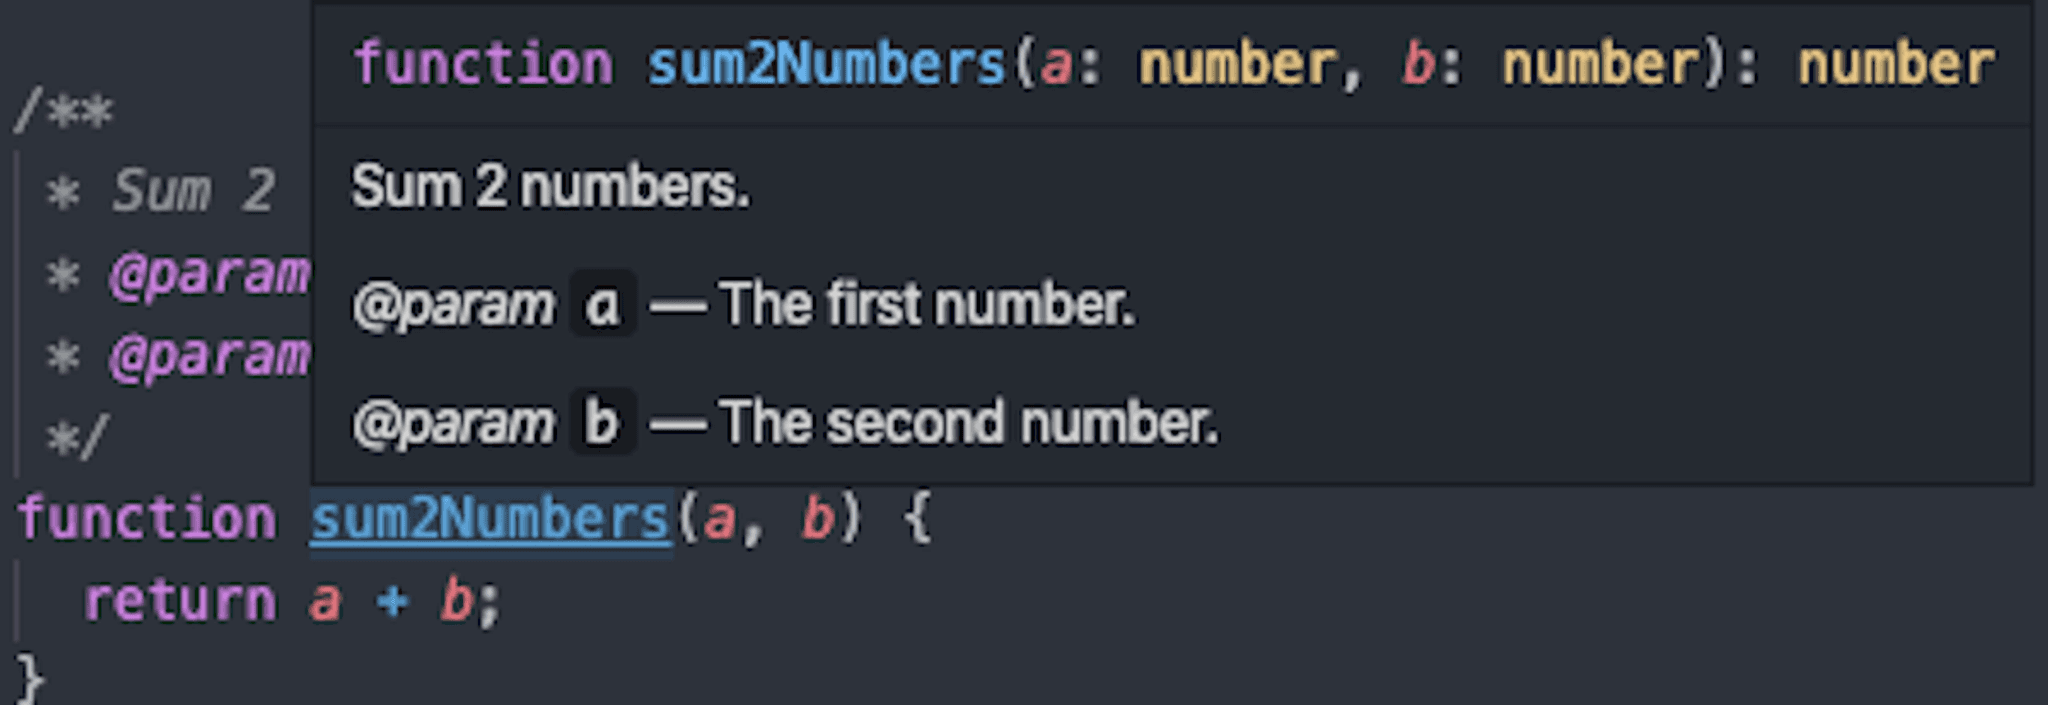 Function sum2Numbers with JSDoc.